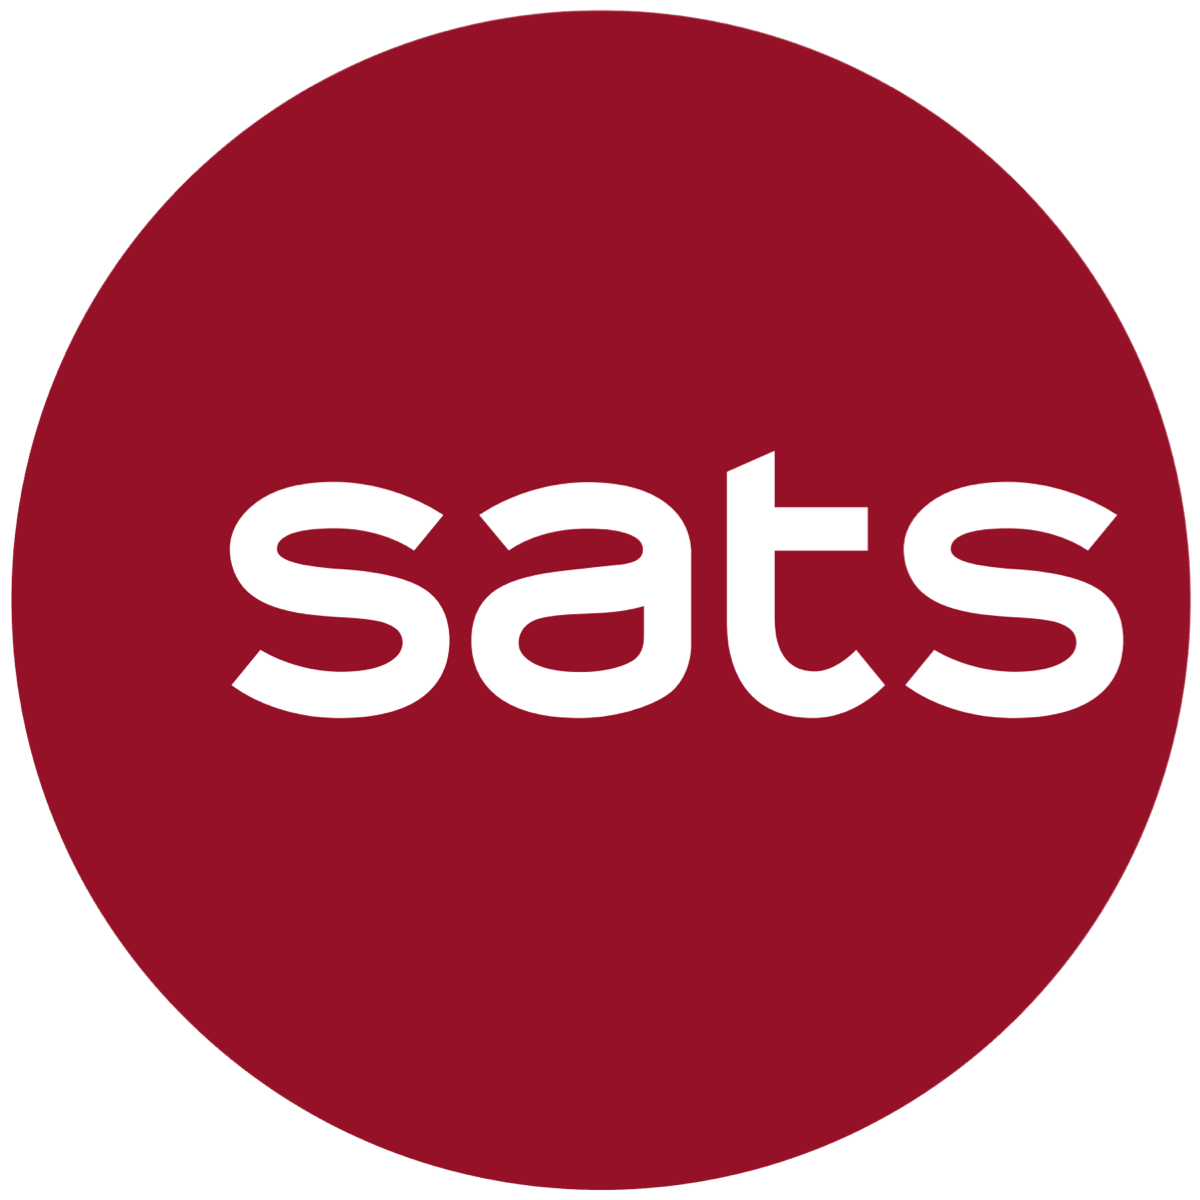 SATS (SATS SP) - UOB Kay Hian 2017-08-02: Preferred Play On Strong Cargo Traffic And Stabilising Yields; Upgrade To BUY